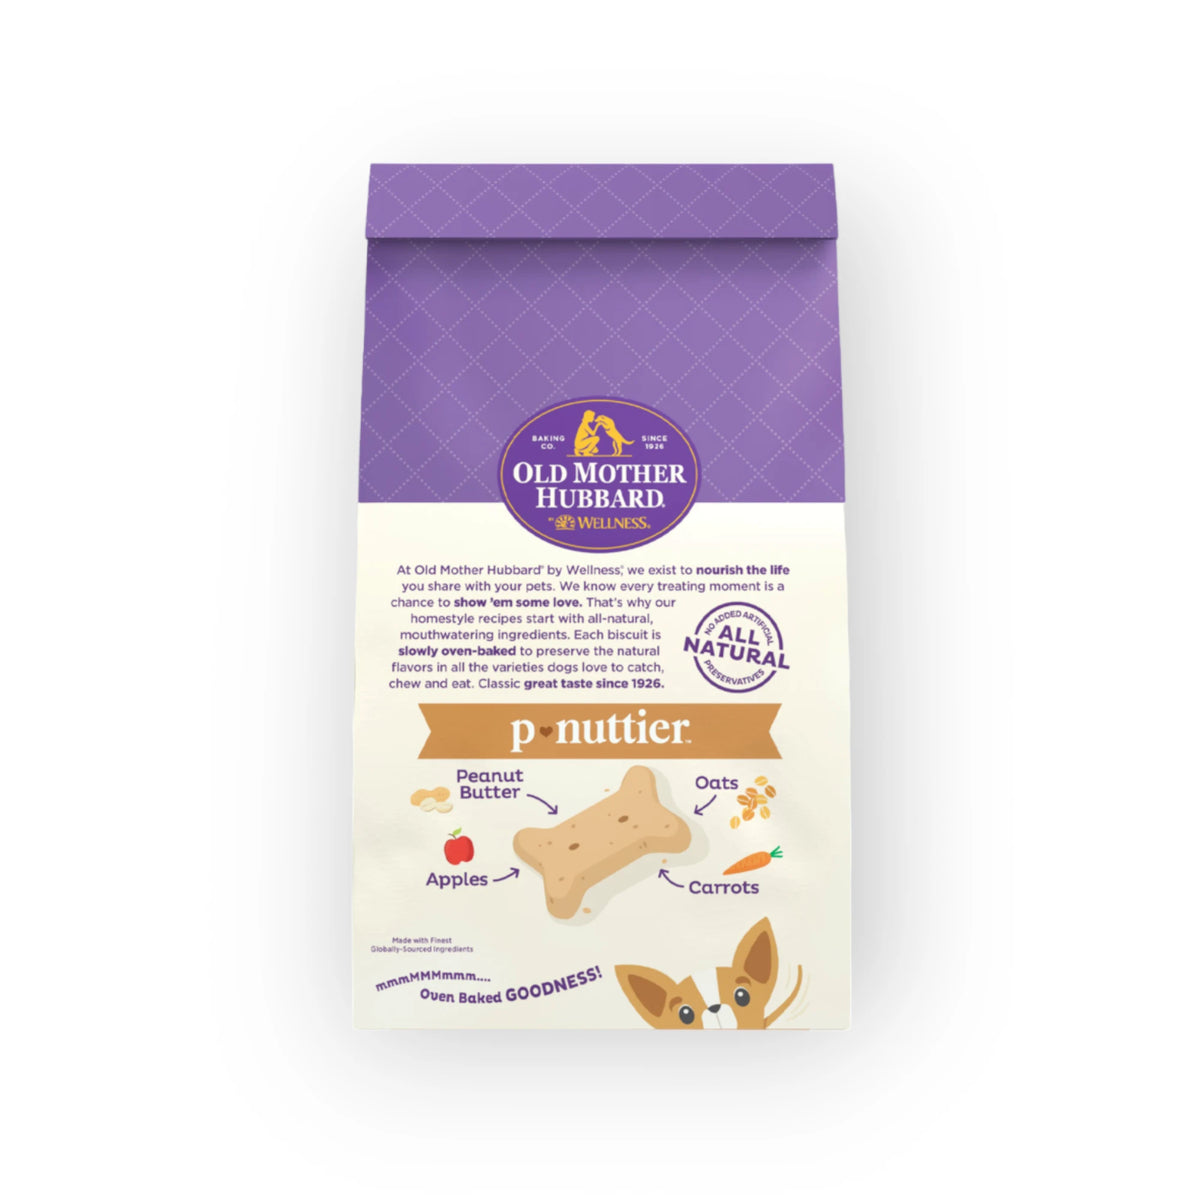 Old Mother Hubbard P-Nuttier Dog Biscuits | Natural & Crunchy